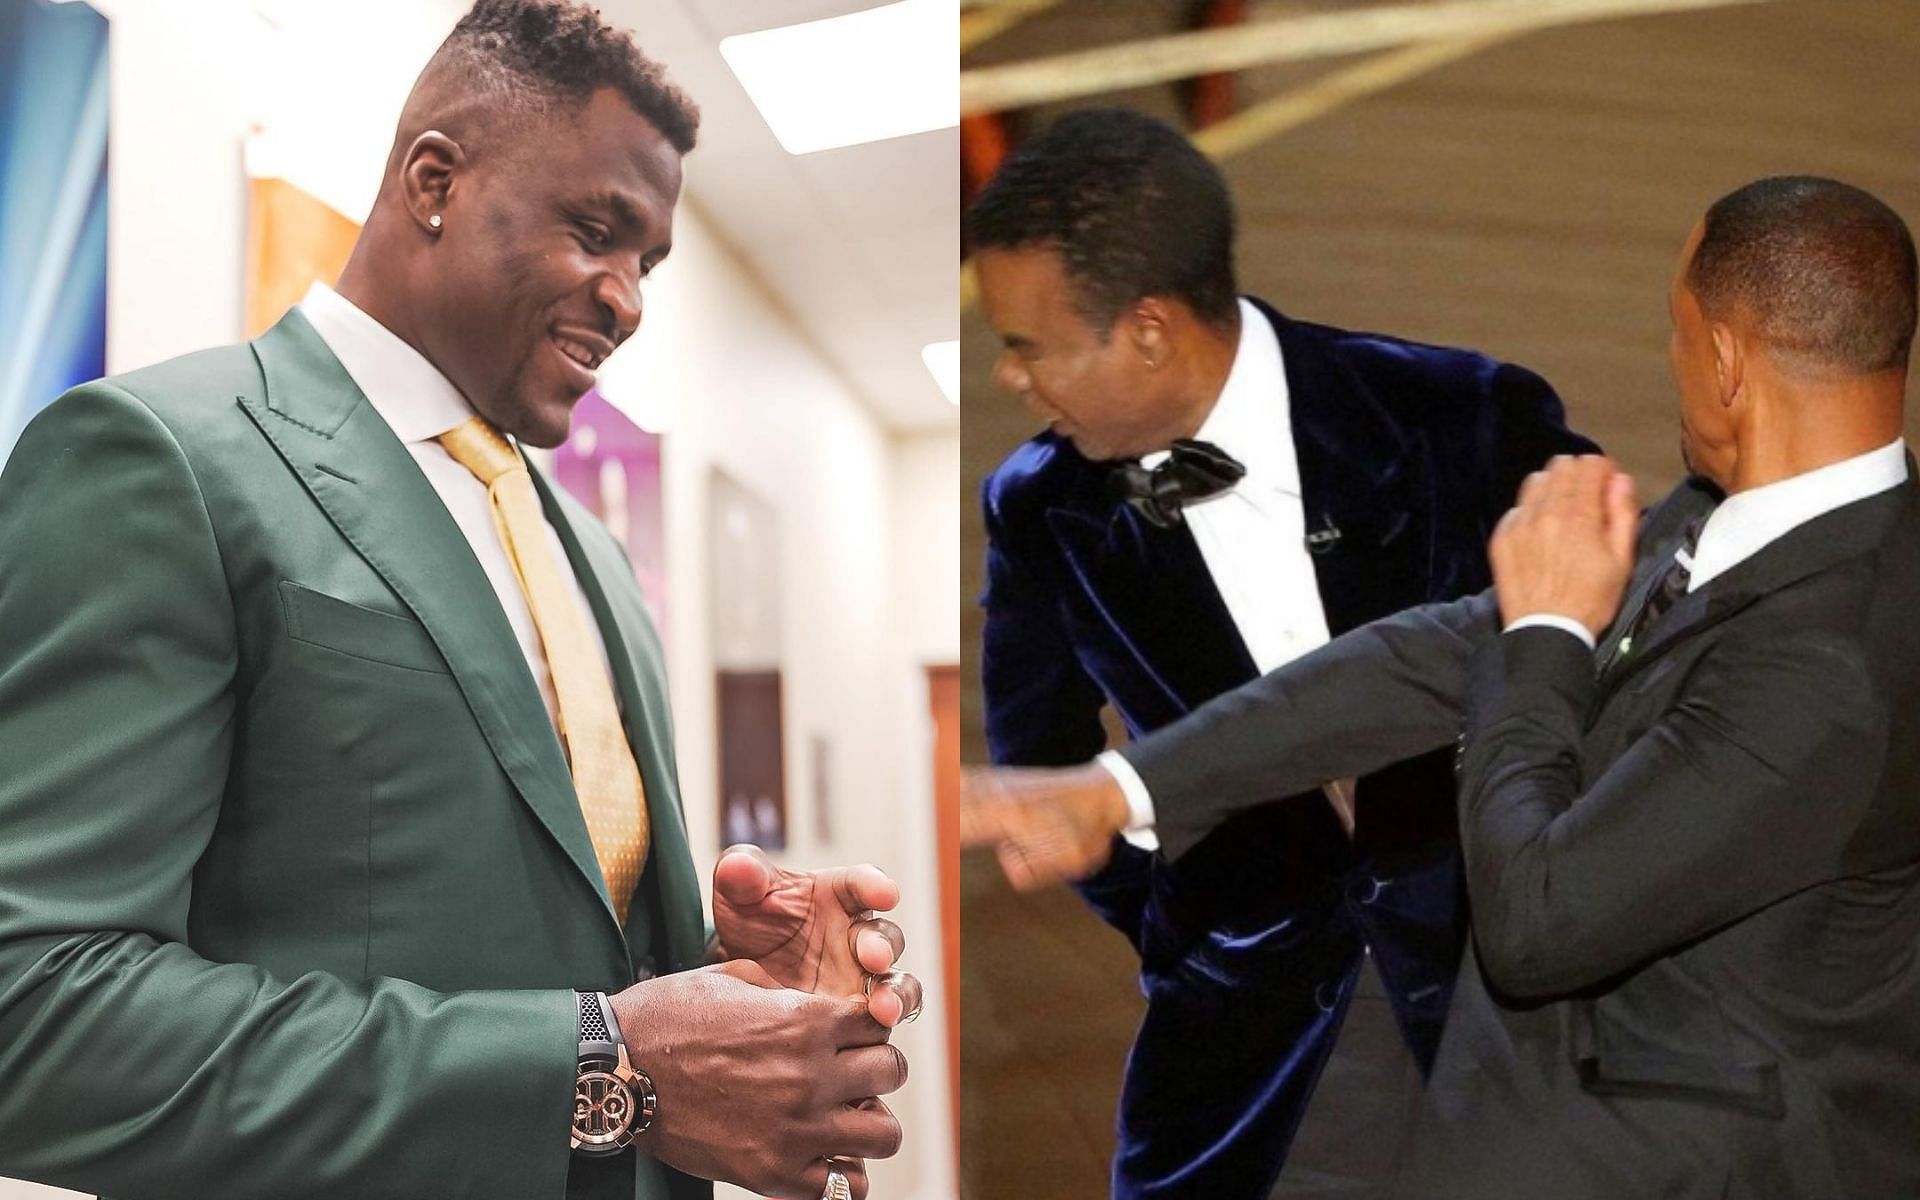 Francis Ngannou (L) and Will Smith-Chris Rock altercation (R) via Instagram @francisngannou